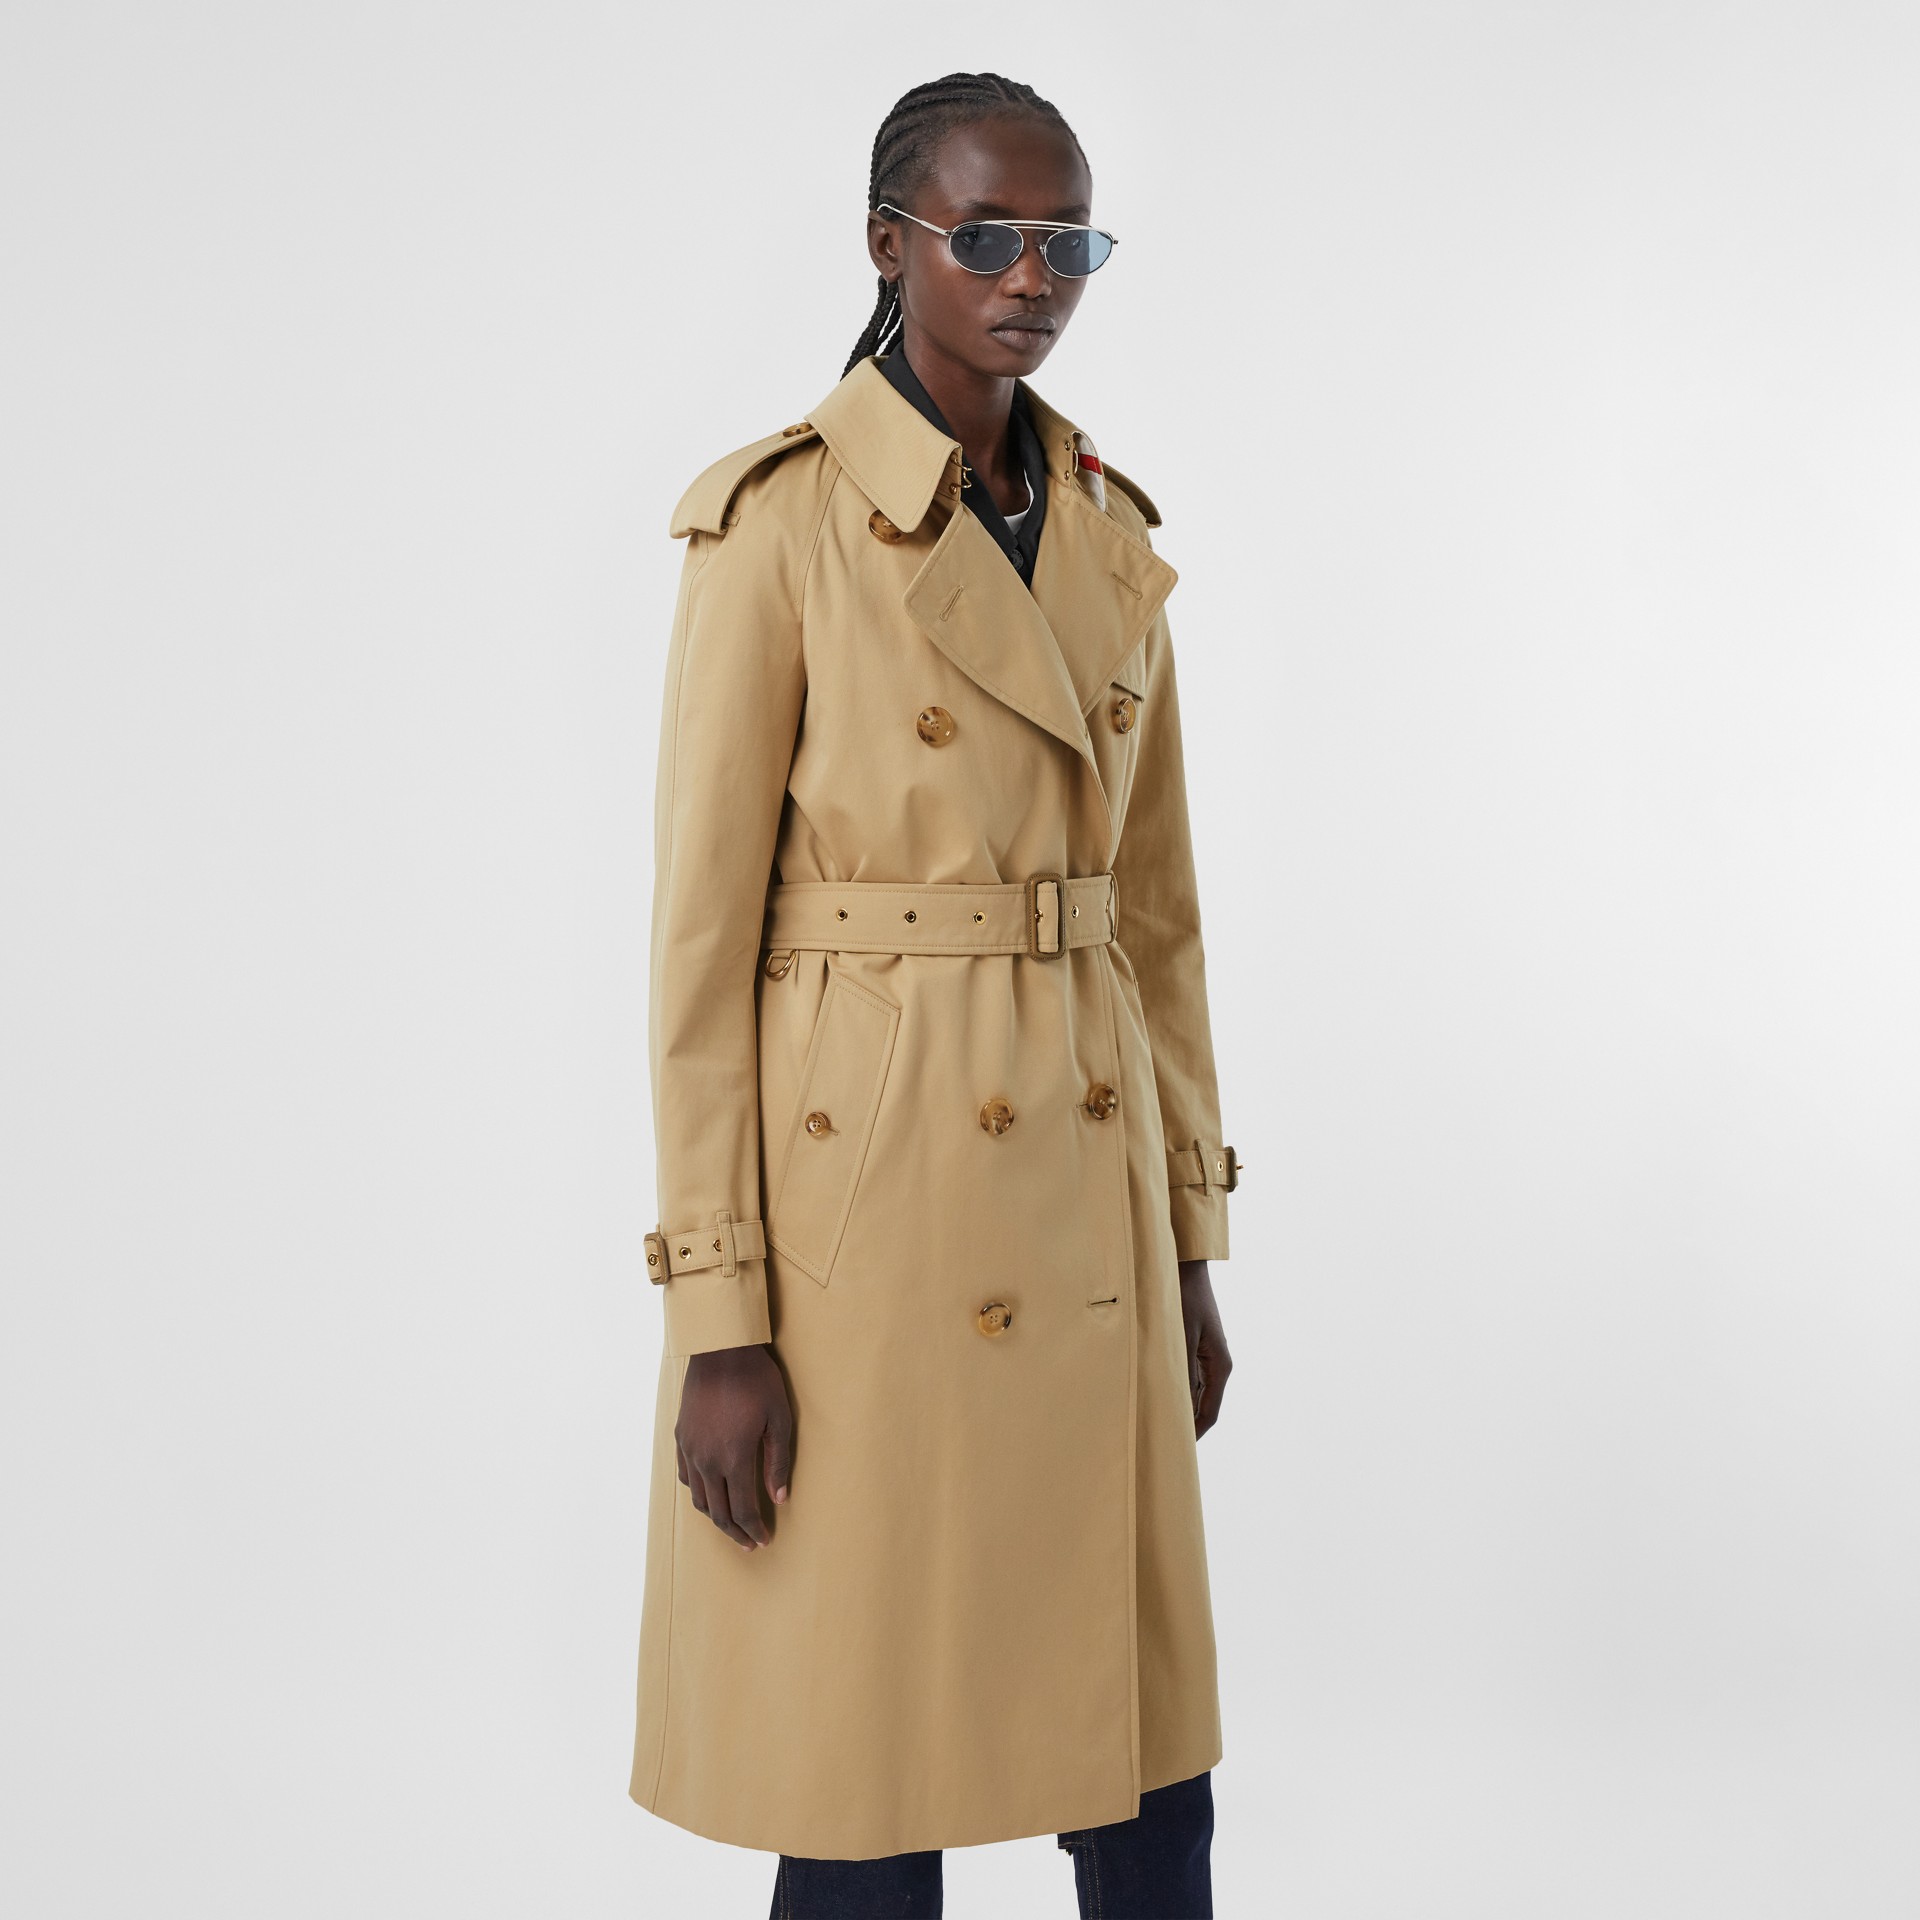 Archive Scarf Print-lined Trench Coat - Women | Burberry United States